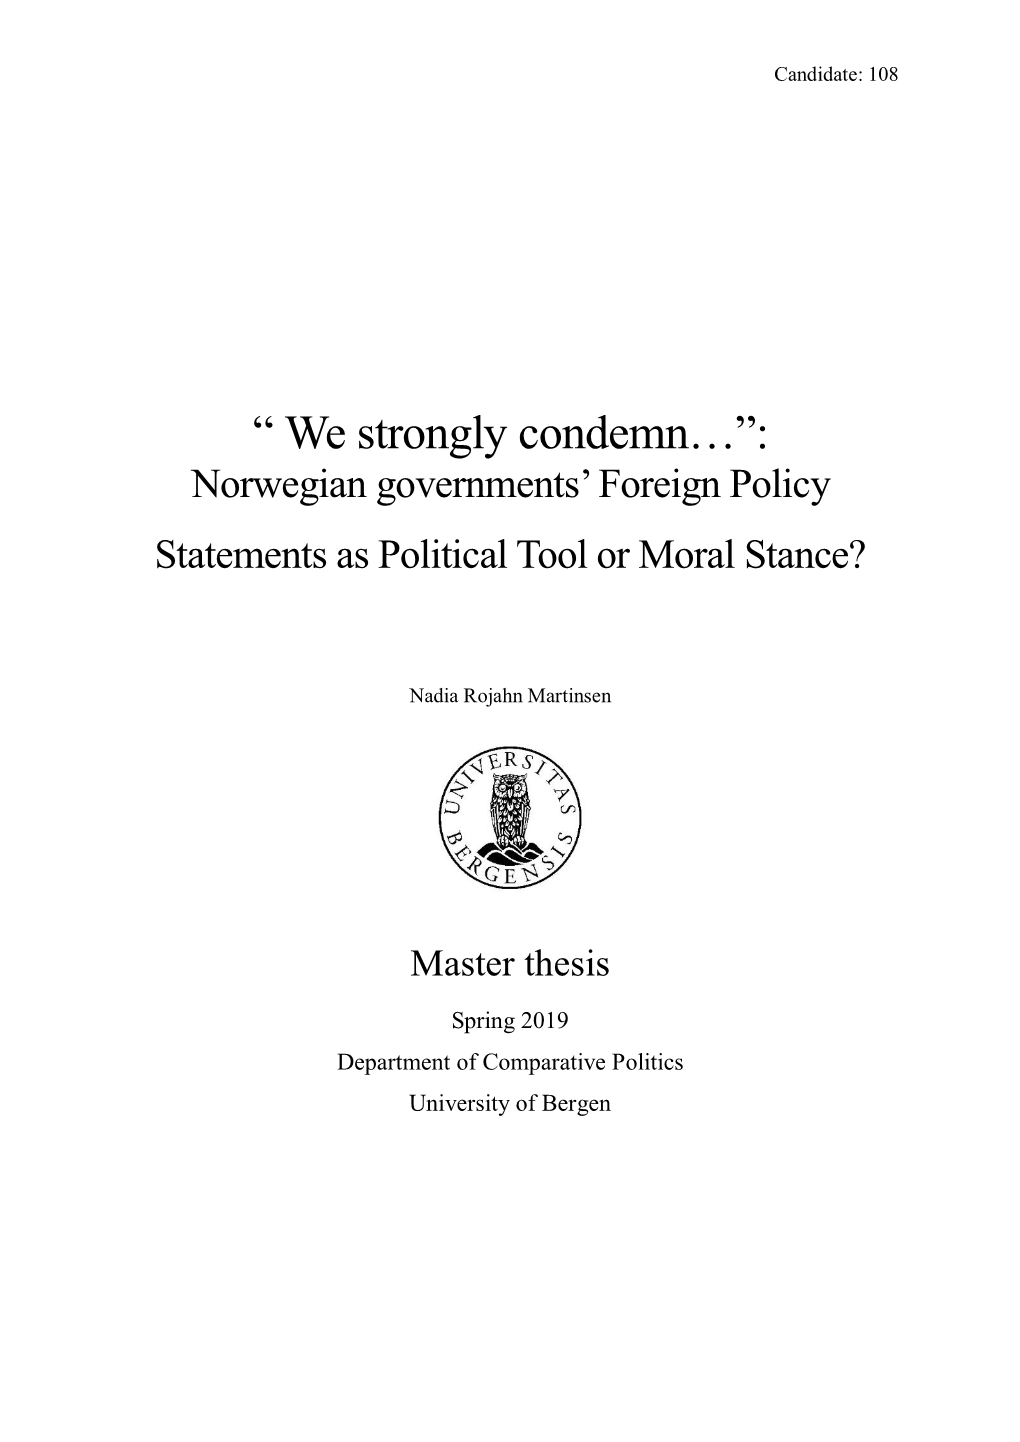 “ We Strongly Condemn…”: Norwegian Governments’ Foreign Policy Statements As Political Tool Or Moral Stance?